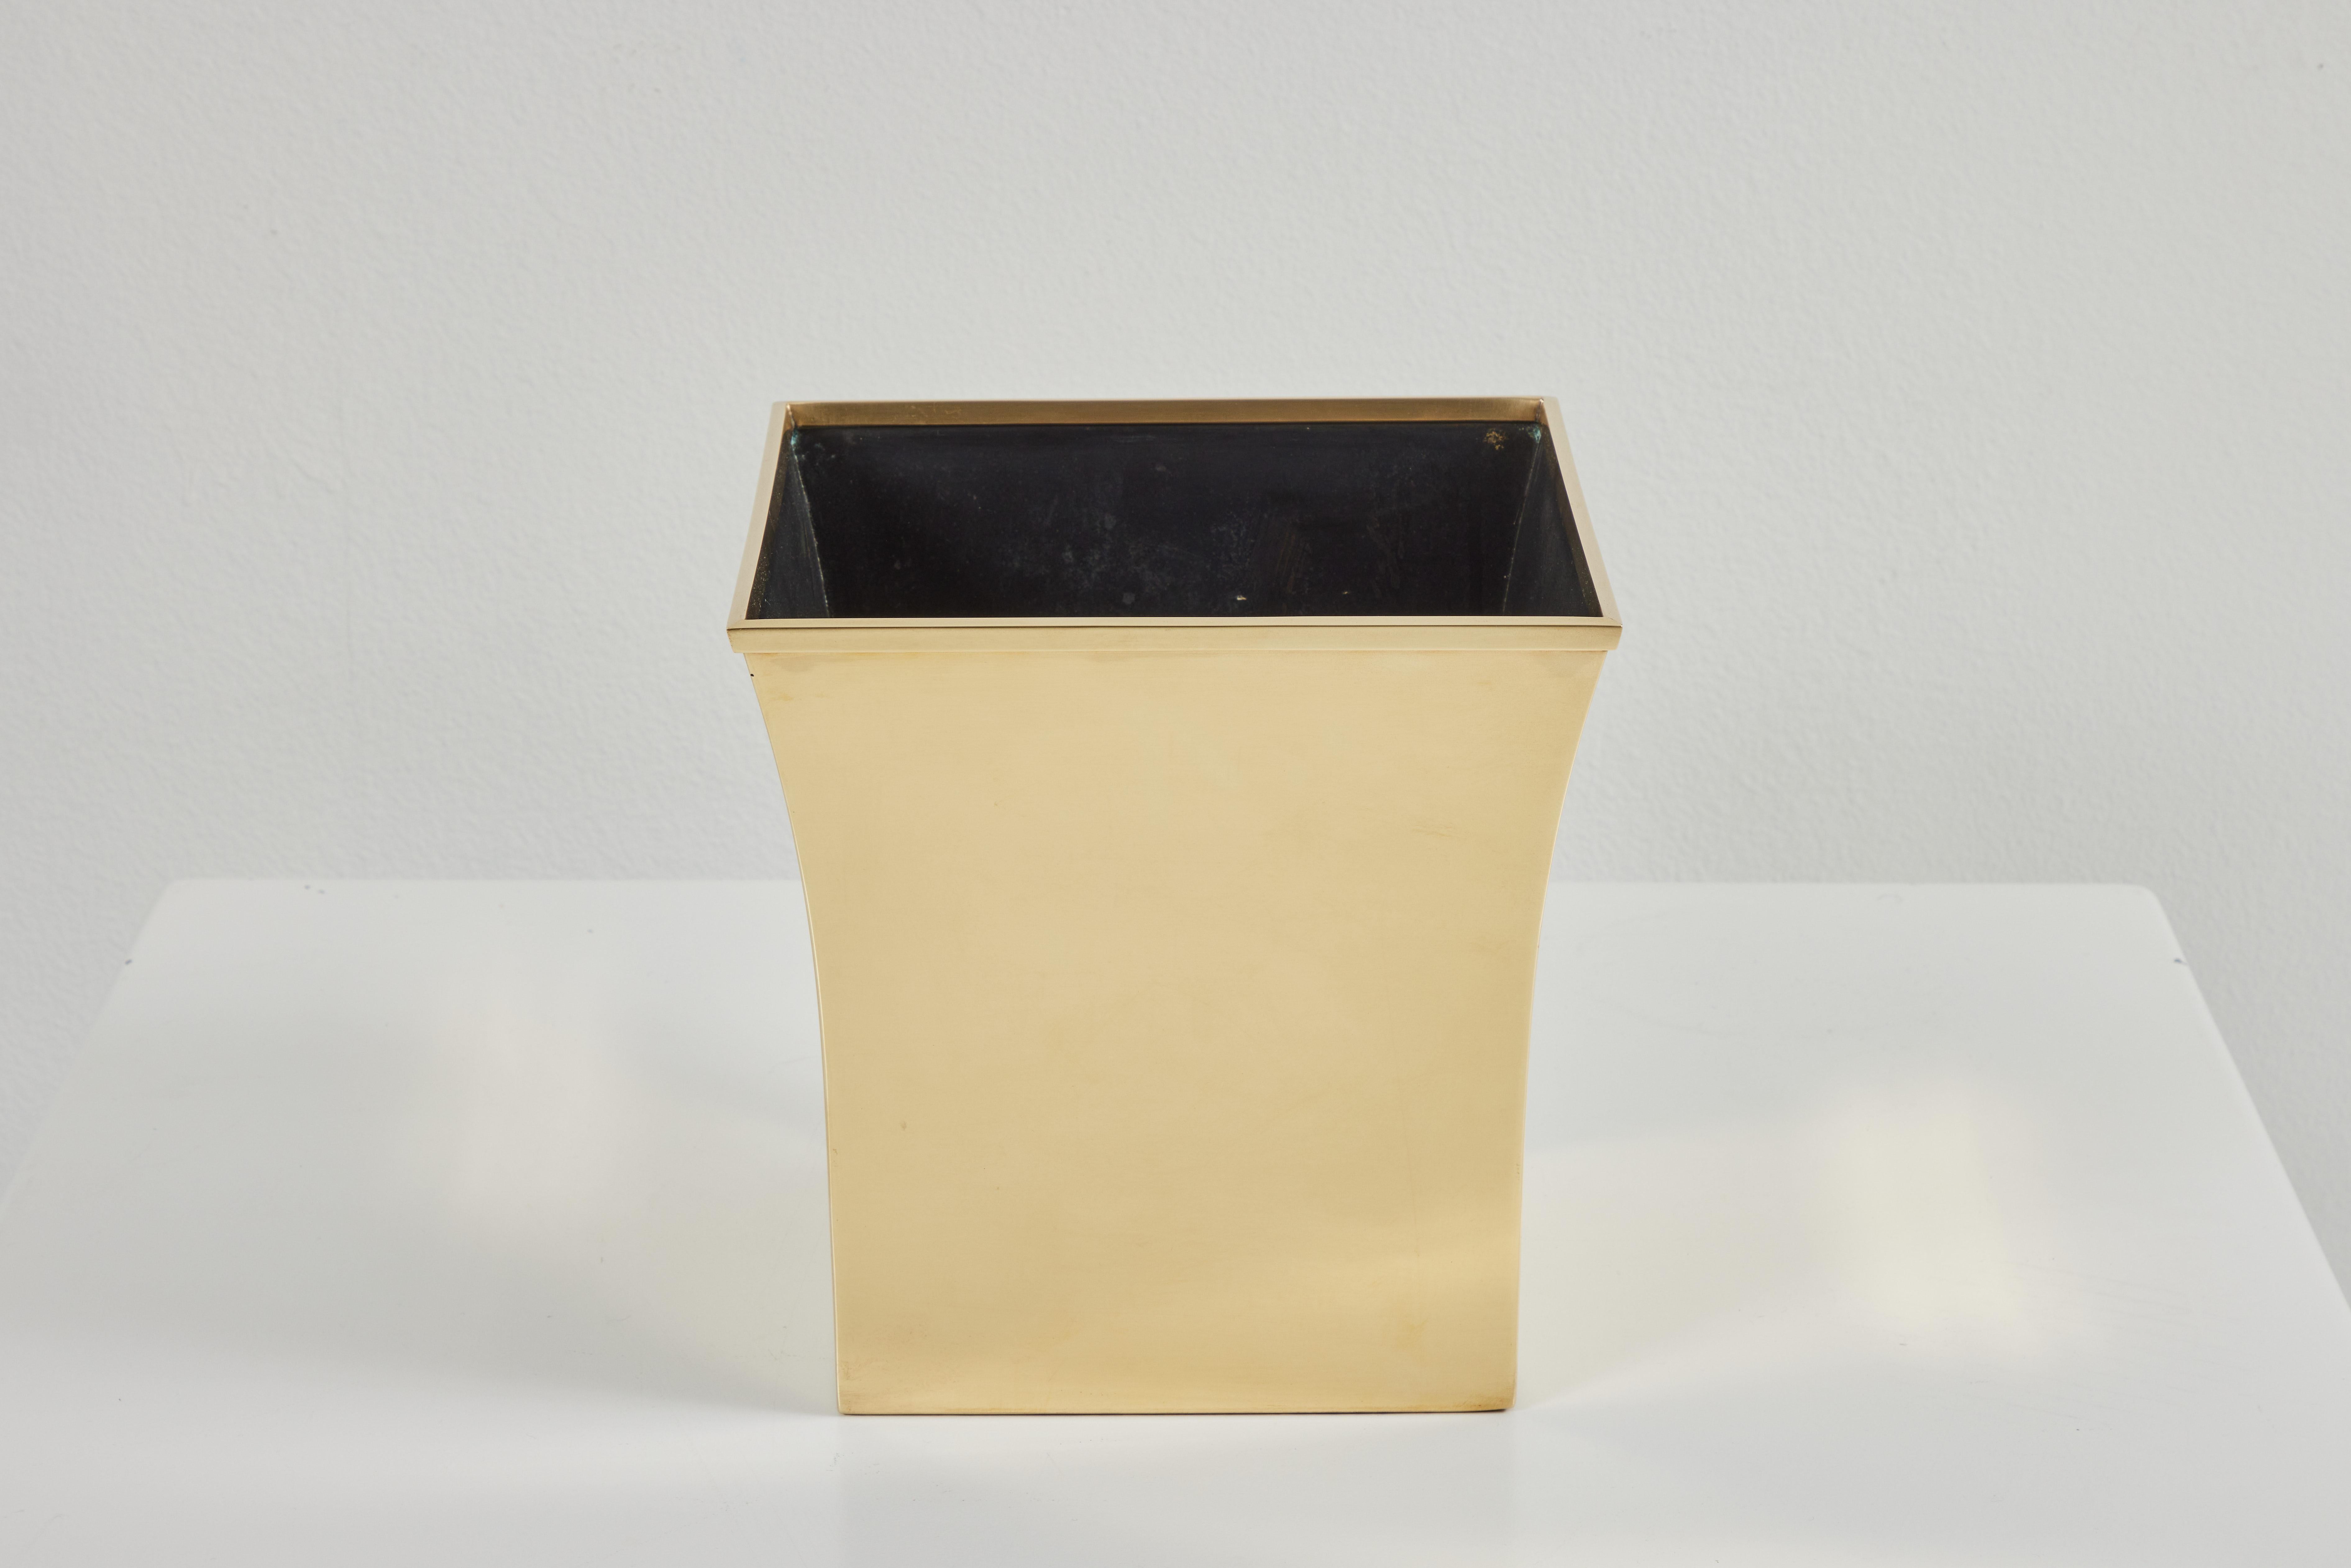 This solid brass waste basket by Karl Springer is simple yet elegant. The edges flair out just slightly and the inside is black. This waste basket came out of a home in Honolulu, Hawaii that contained numerous original and unique Karl Springer